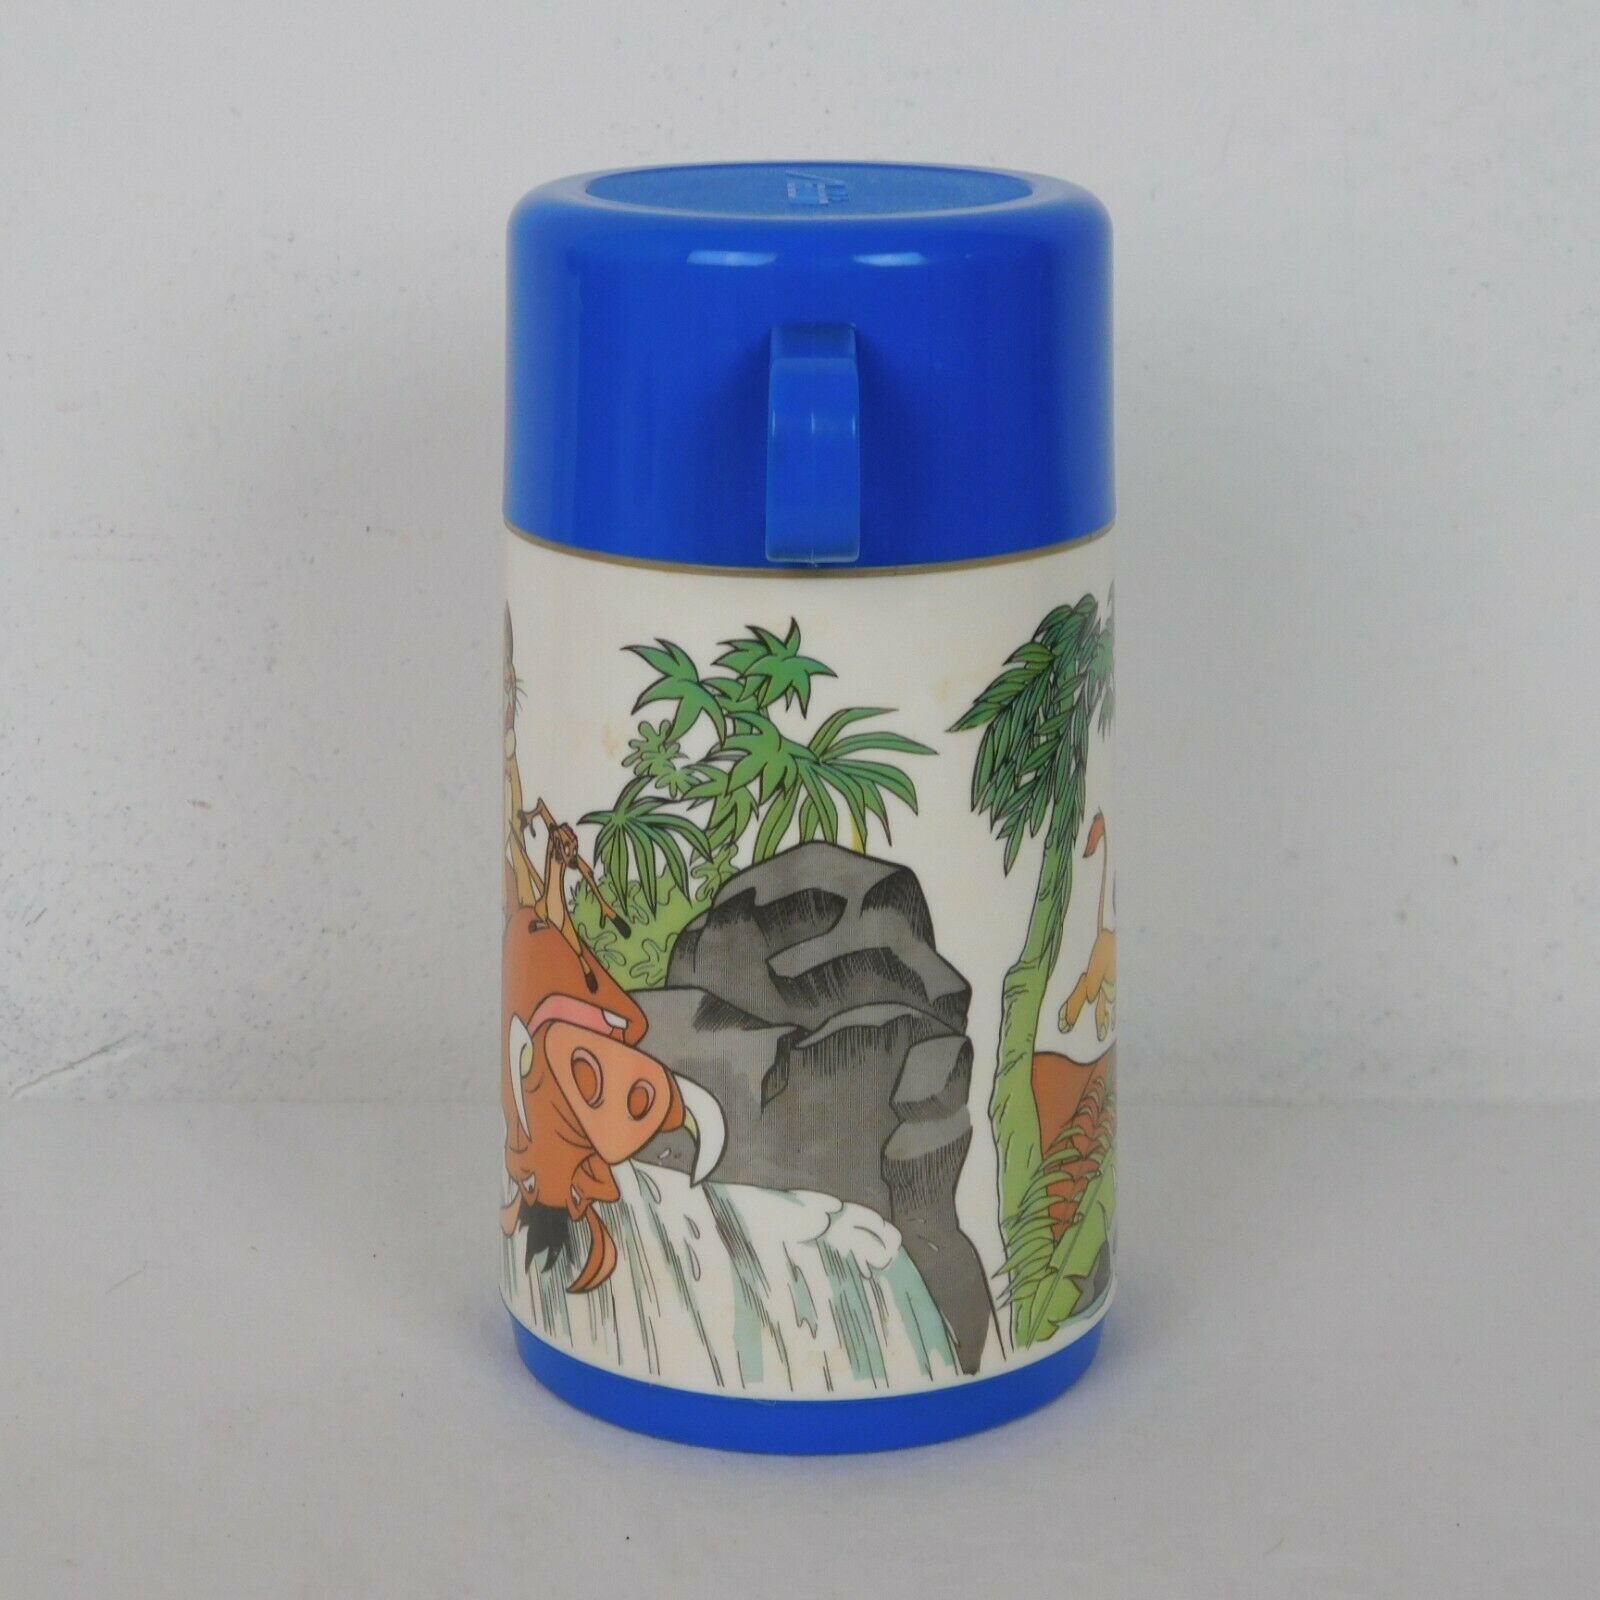 90's Lion King Hakuna Matata Lunch Box With Matching Thermos Flask. Made in  USA 